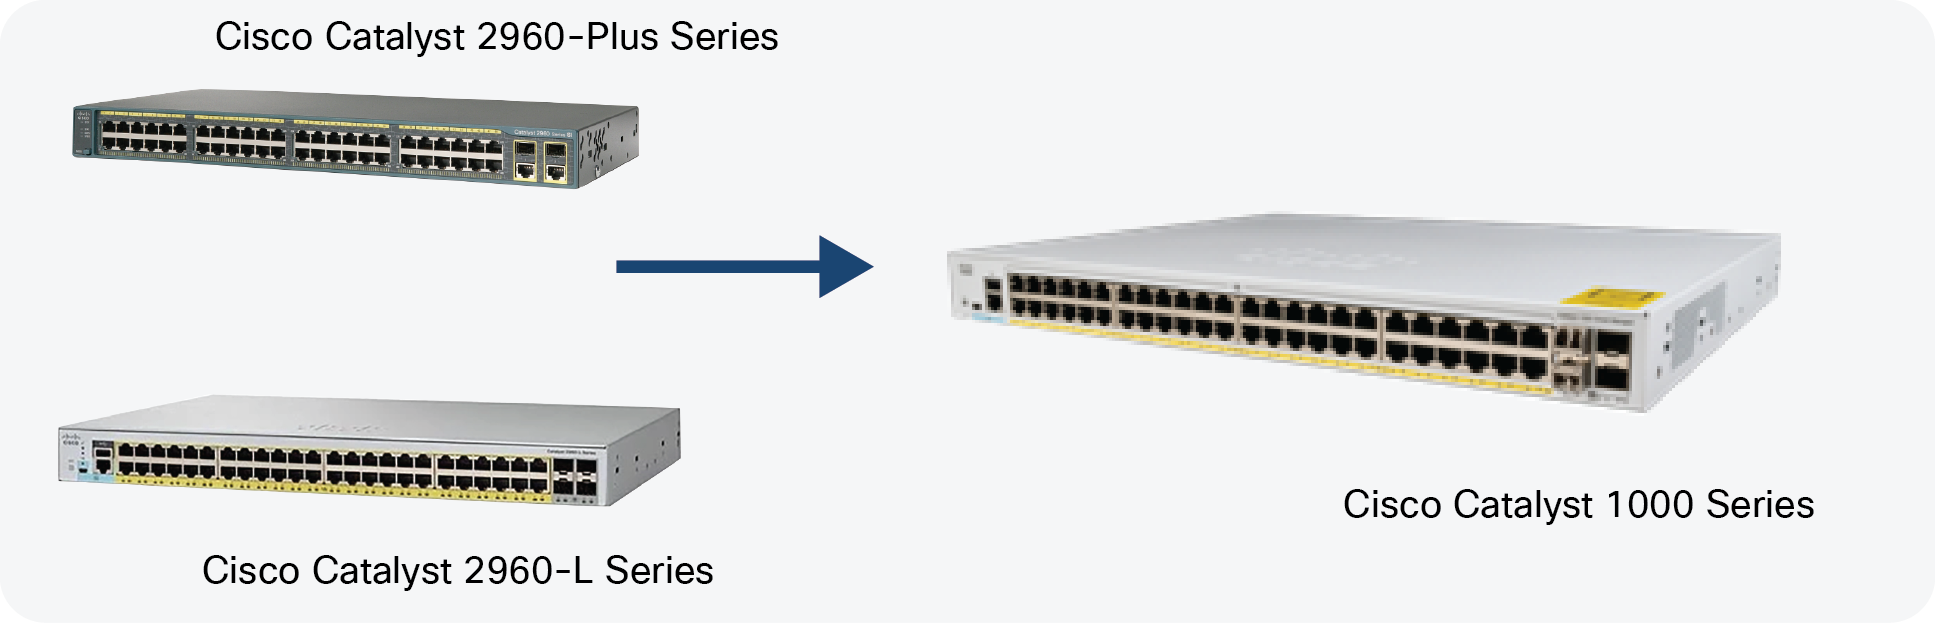 Migration Guide from Cisco Catalyst 2960-L and 2960-Plus Series